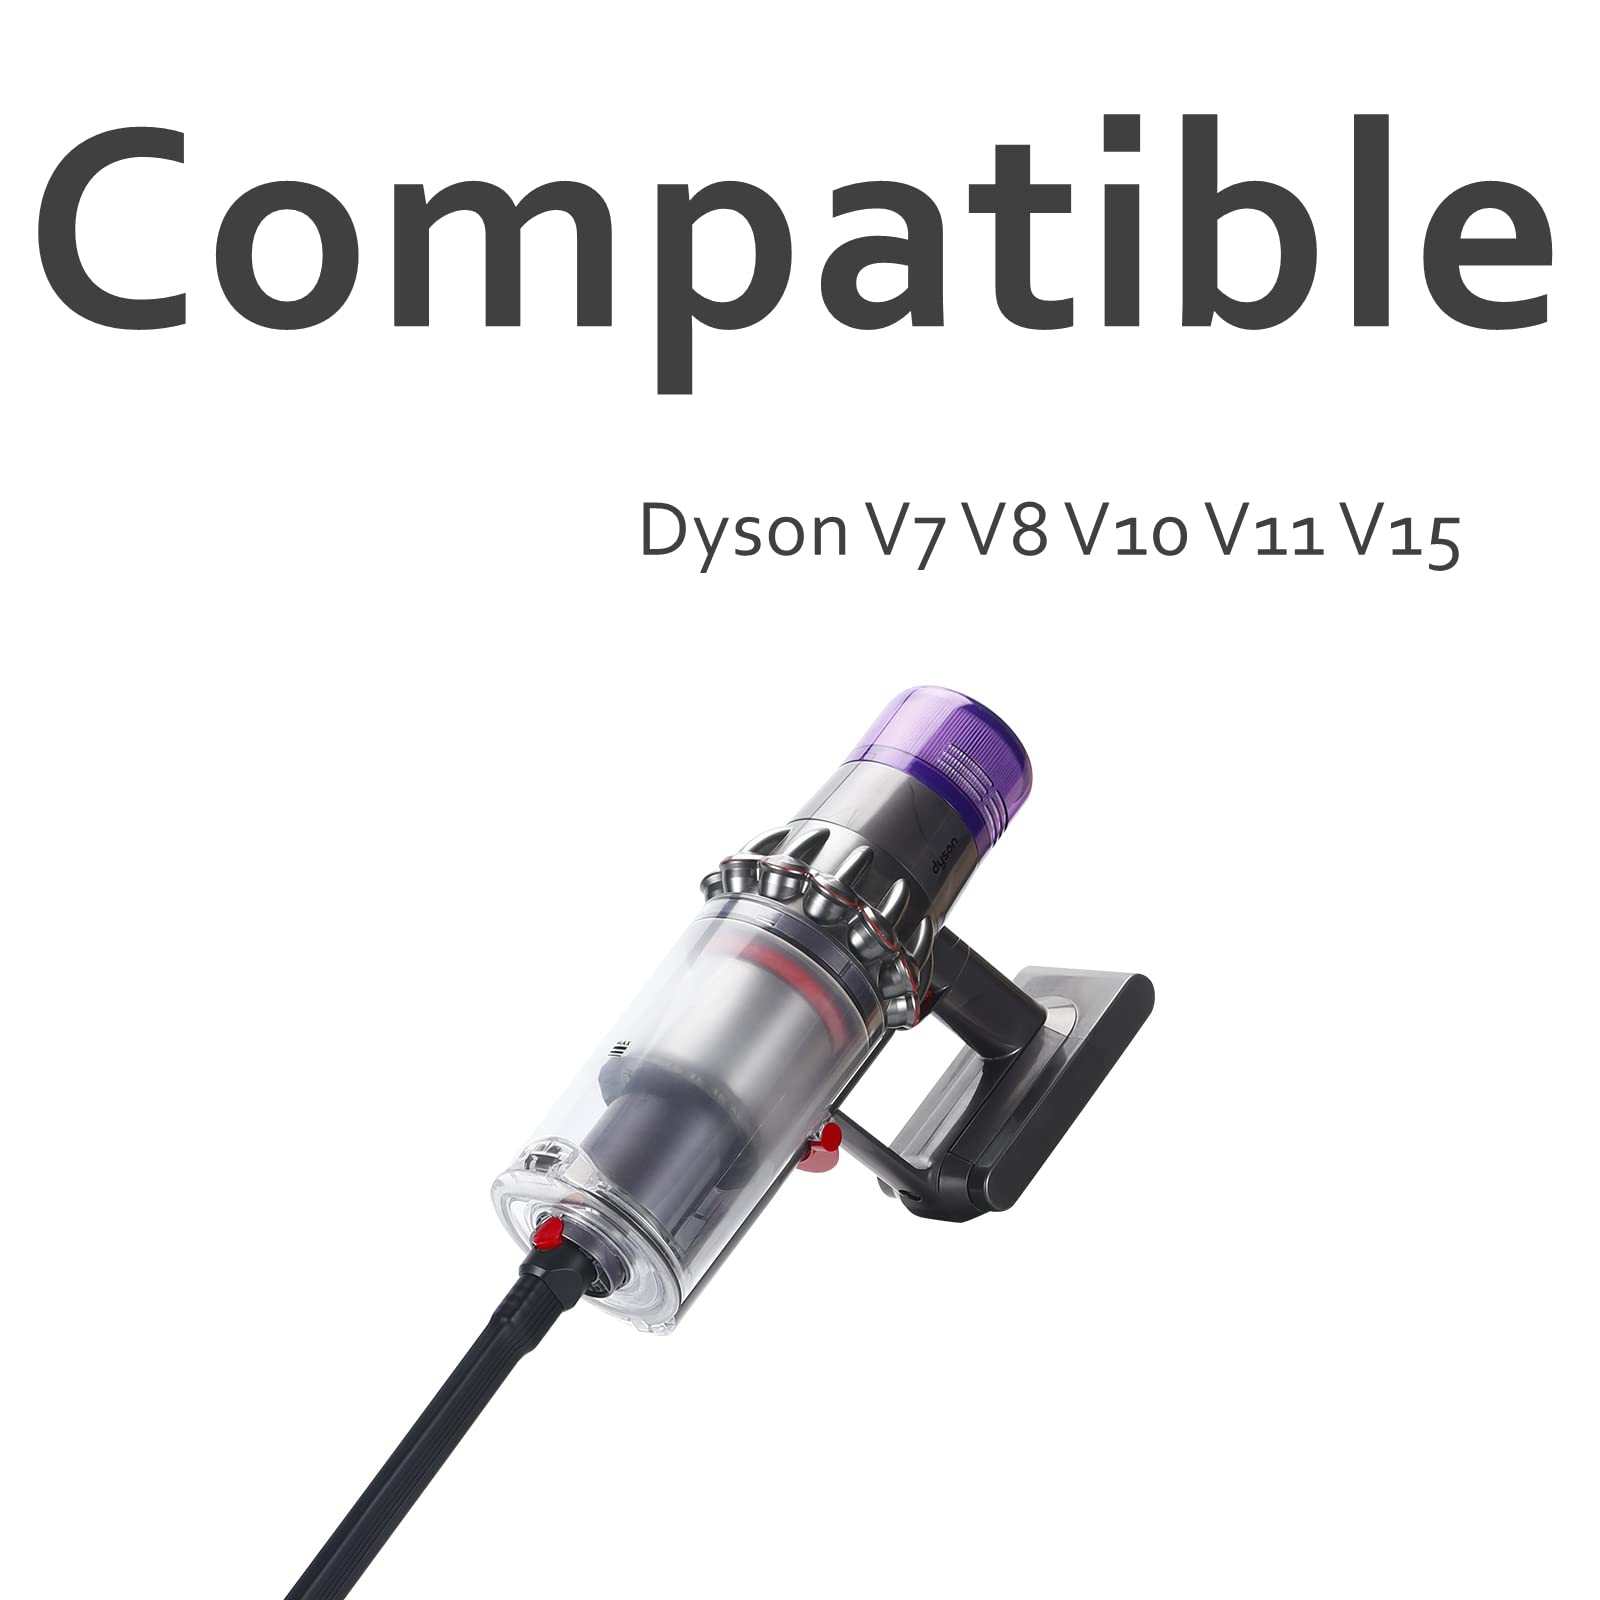 Flexible Crevice Tool for Dyson V7 V8 V10 V11 V15 Cordless Vacuum, Perfect Vacuum Attachment for Dryer Vent, Car Detailing, Corners and Gaps Cleaning - 17 Inches